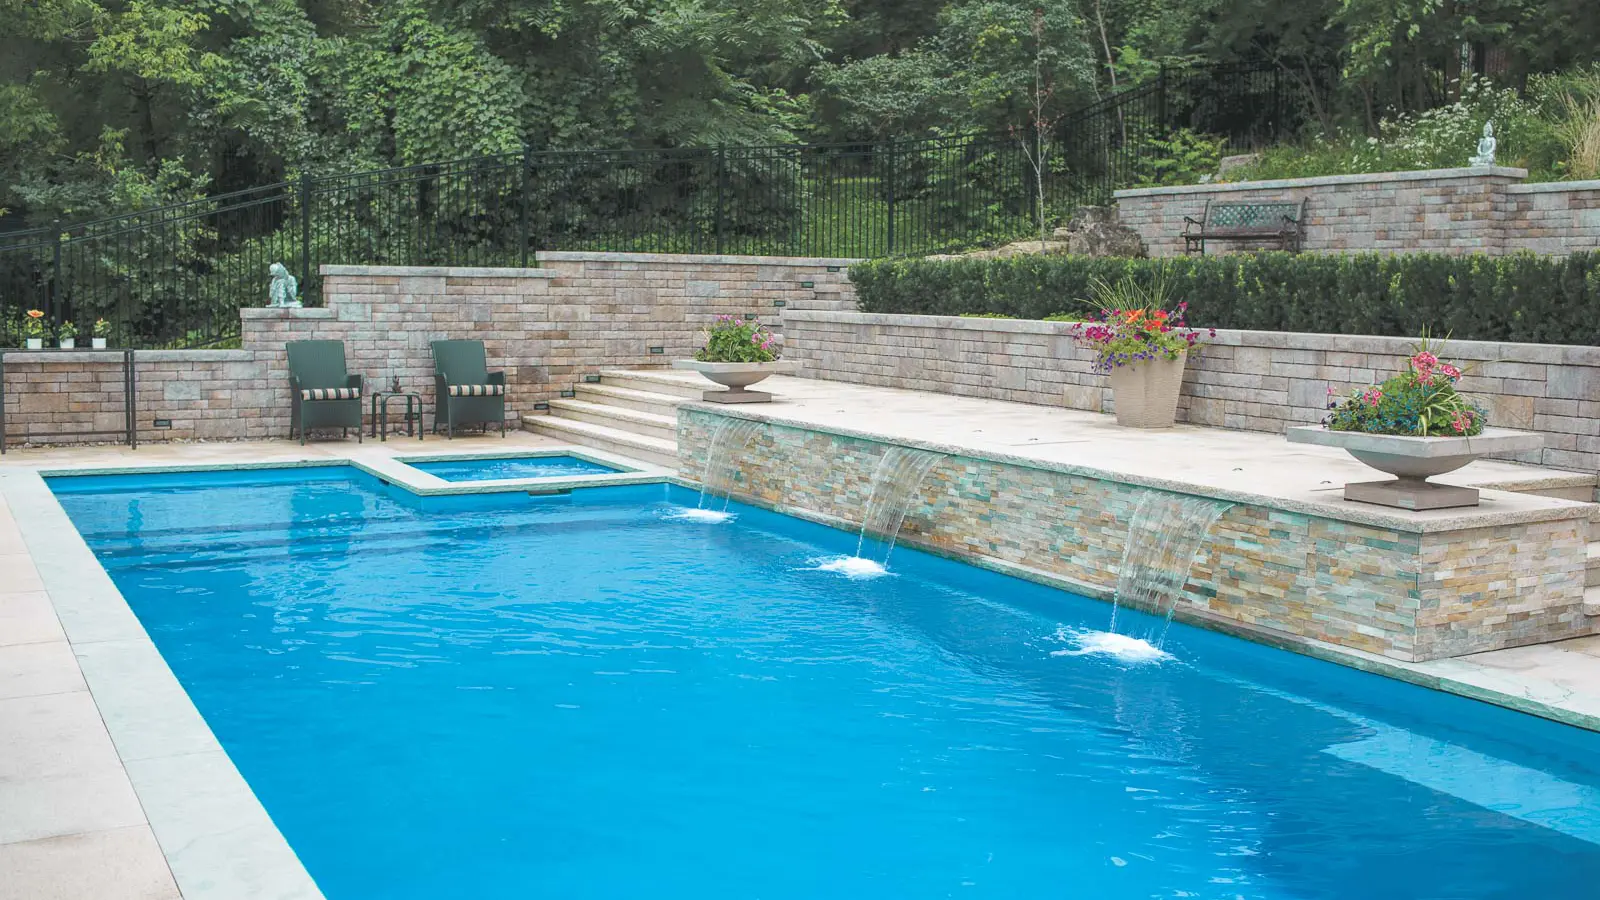 The Ultimate, a fiberglass pool with built-in spa